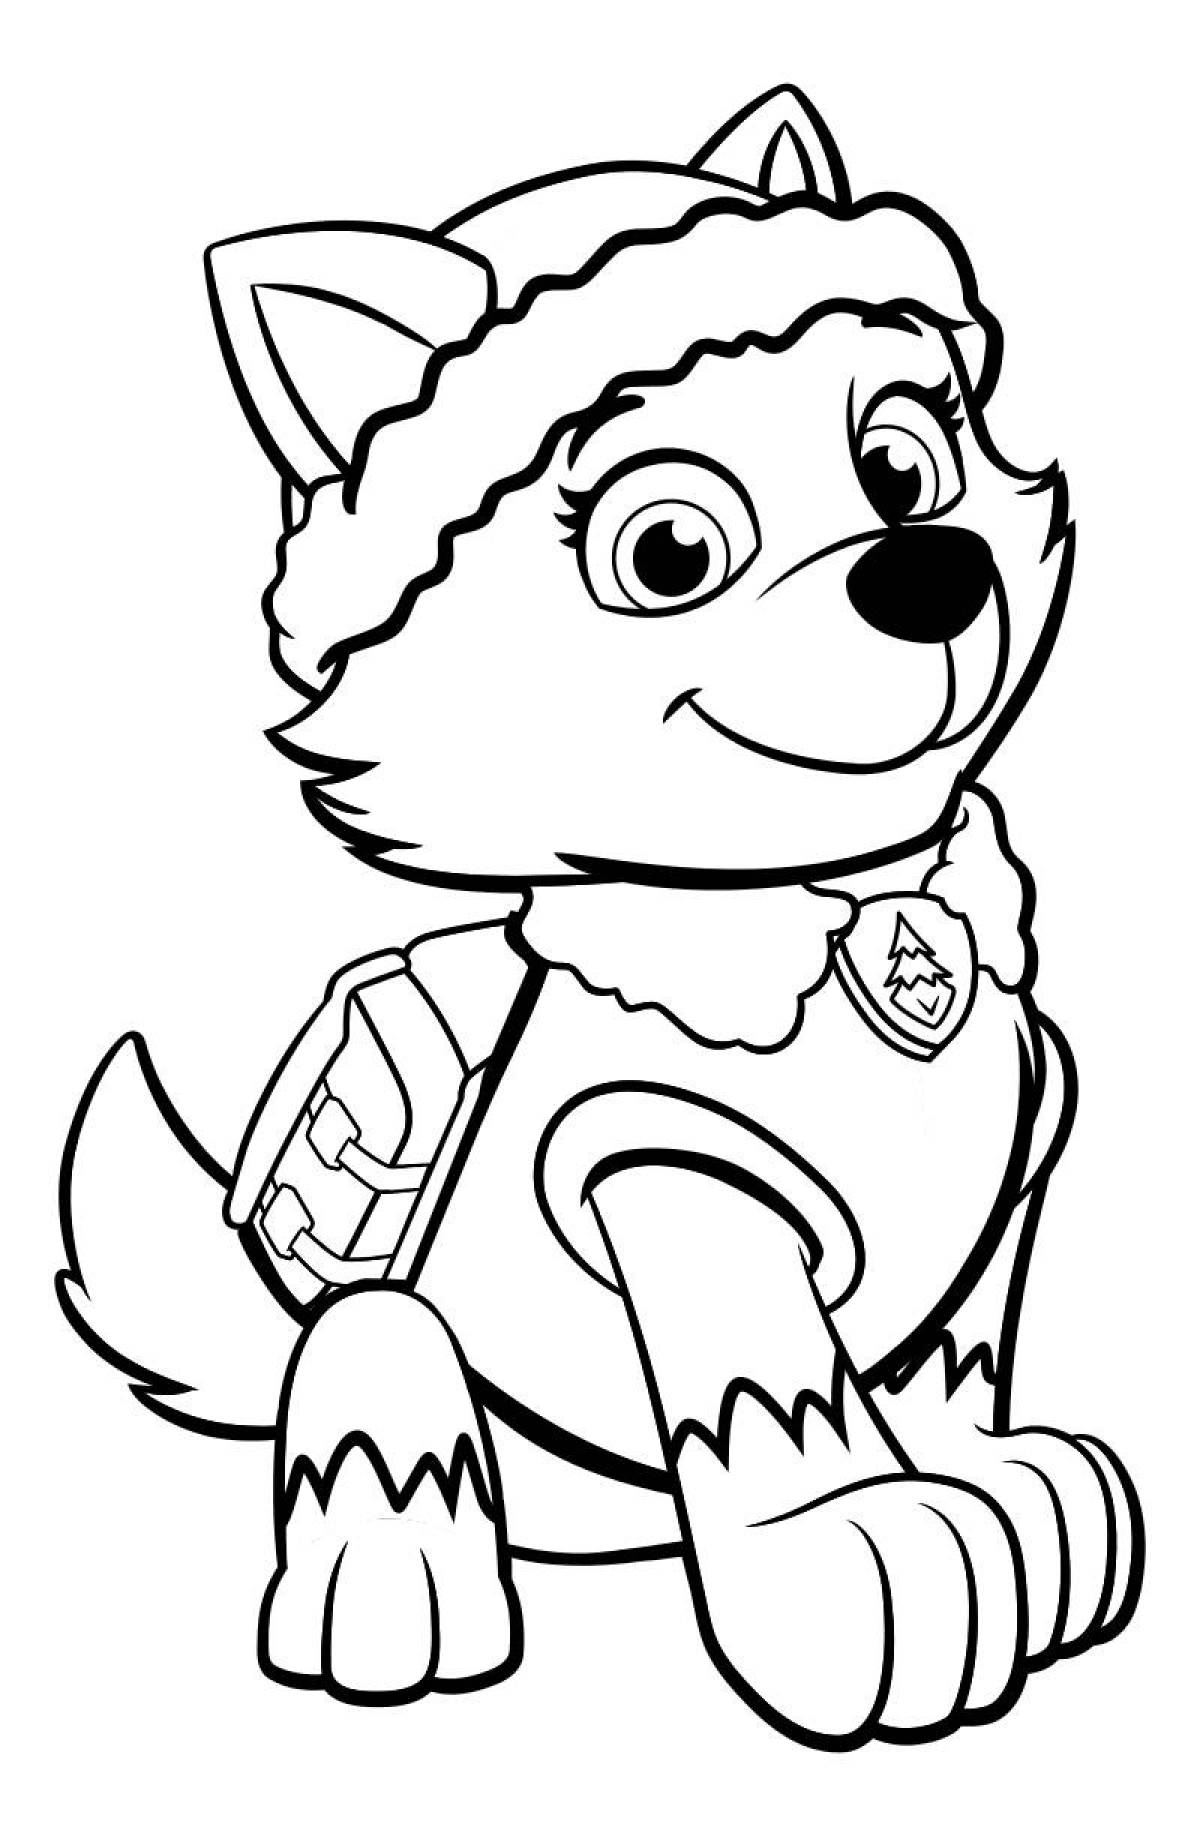 Wonderful Paw Patrol Coloring Pictures